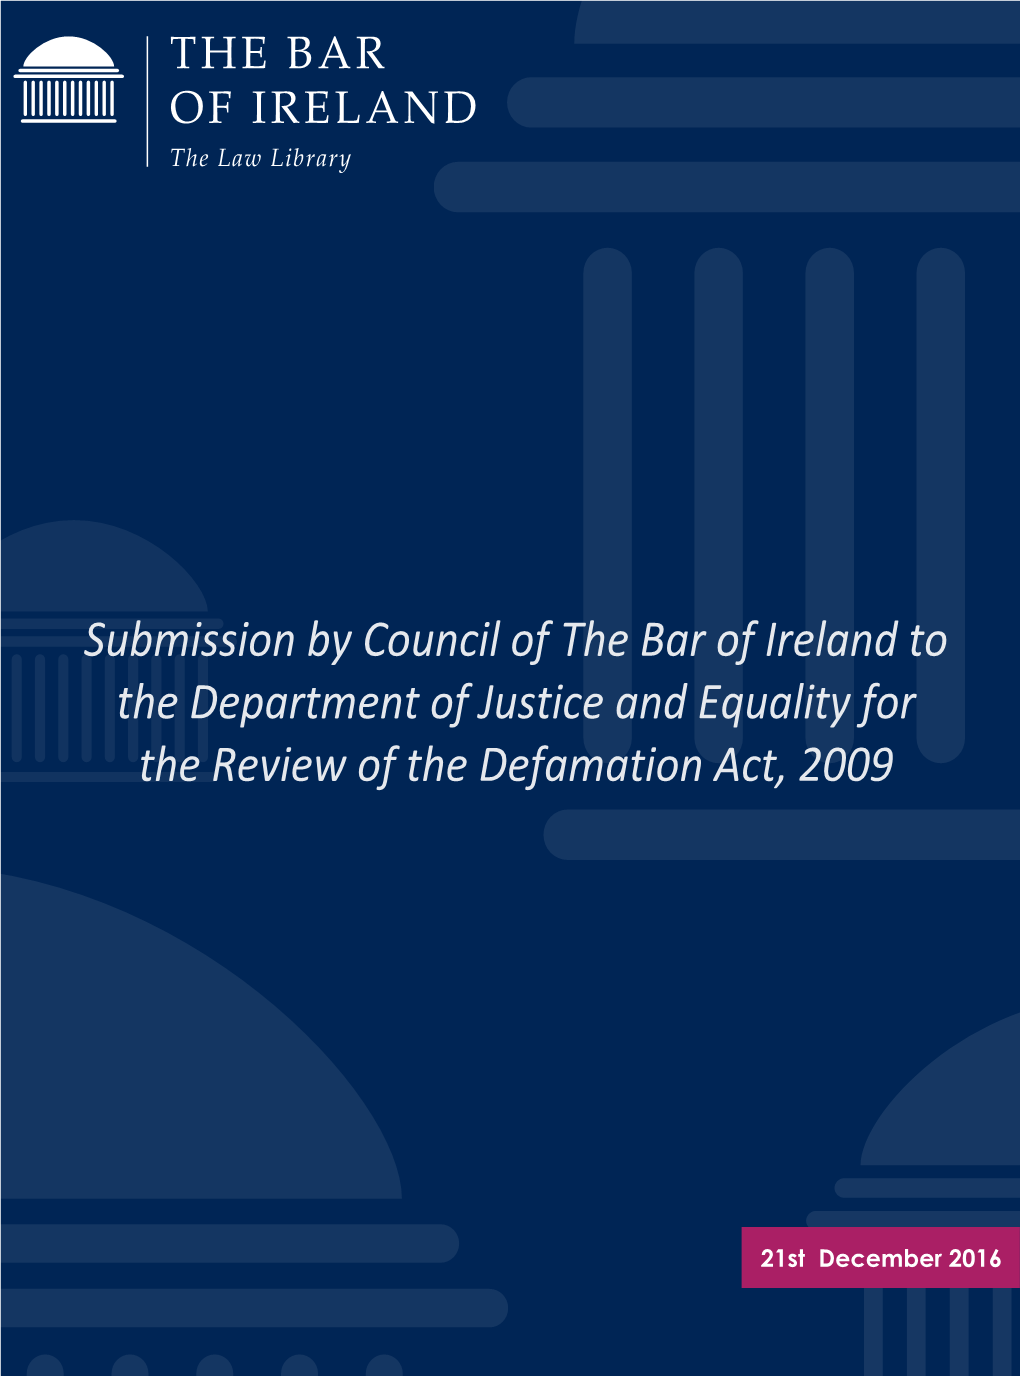 Submission by Council of the Bar of Ireland to the Department of Justice and Equality for the Review of the Defamation Act, 2009